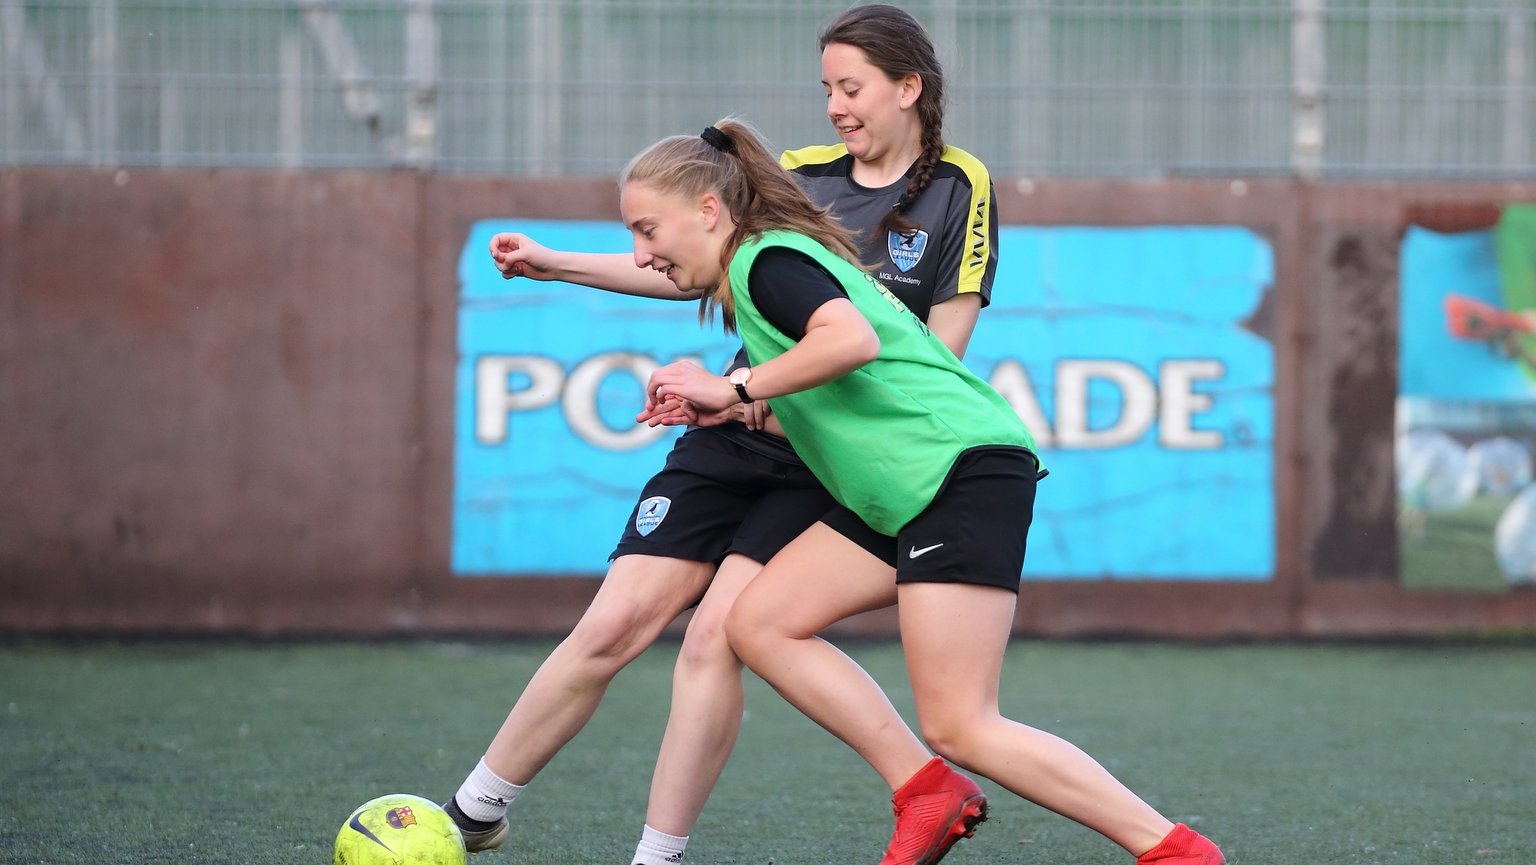 Empowering Girls and Women: The Benefits of Playing Five-a-Side Football